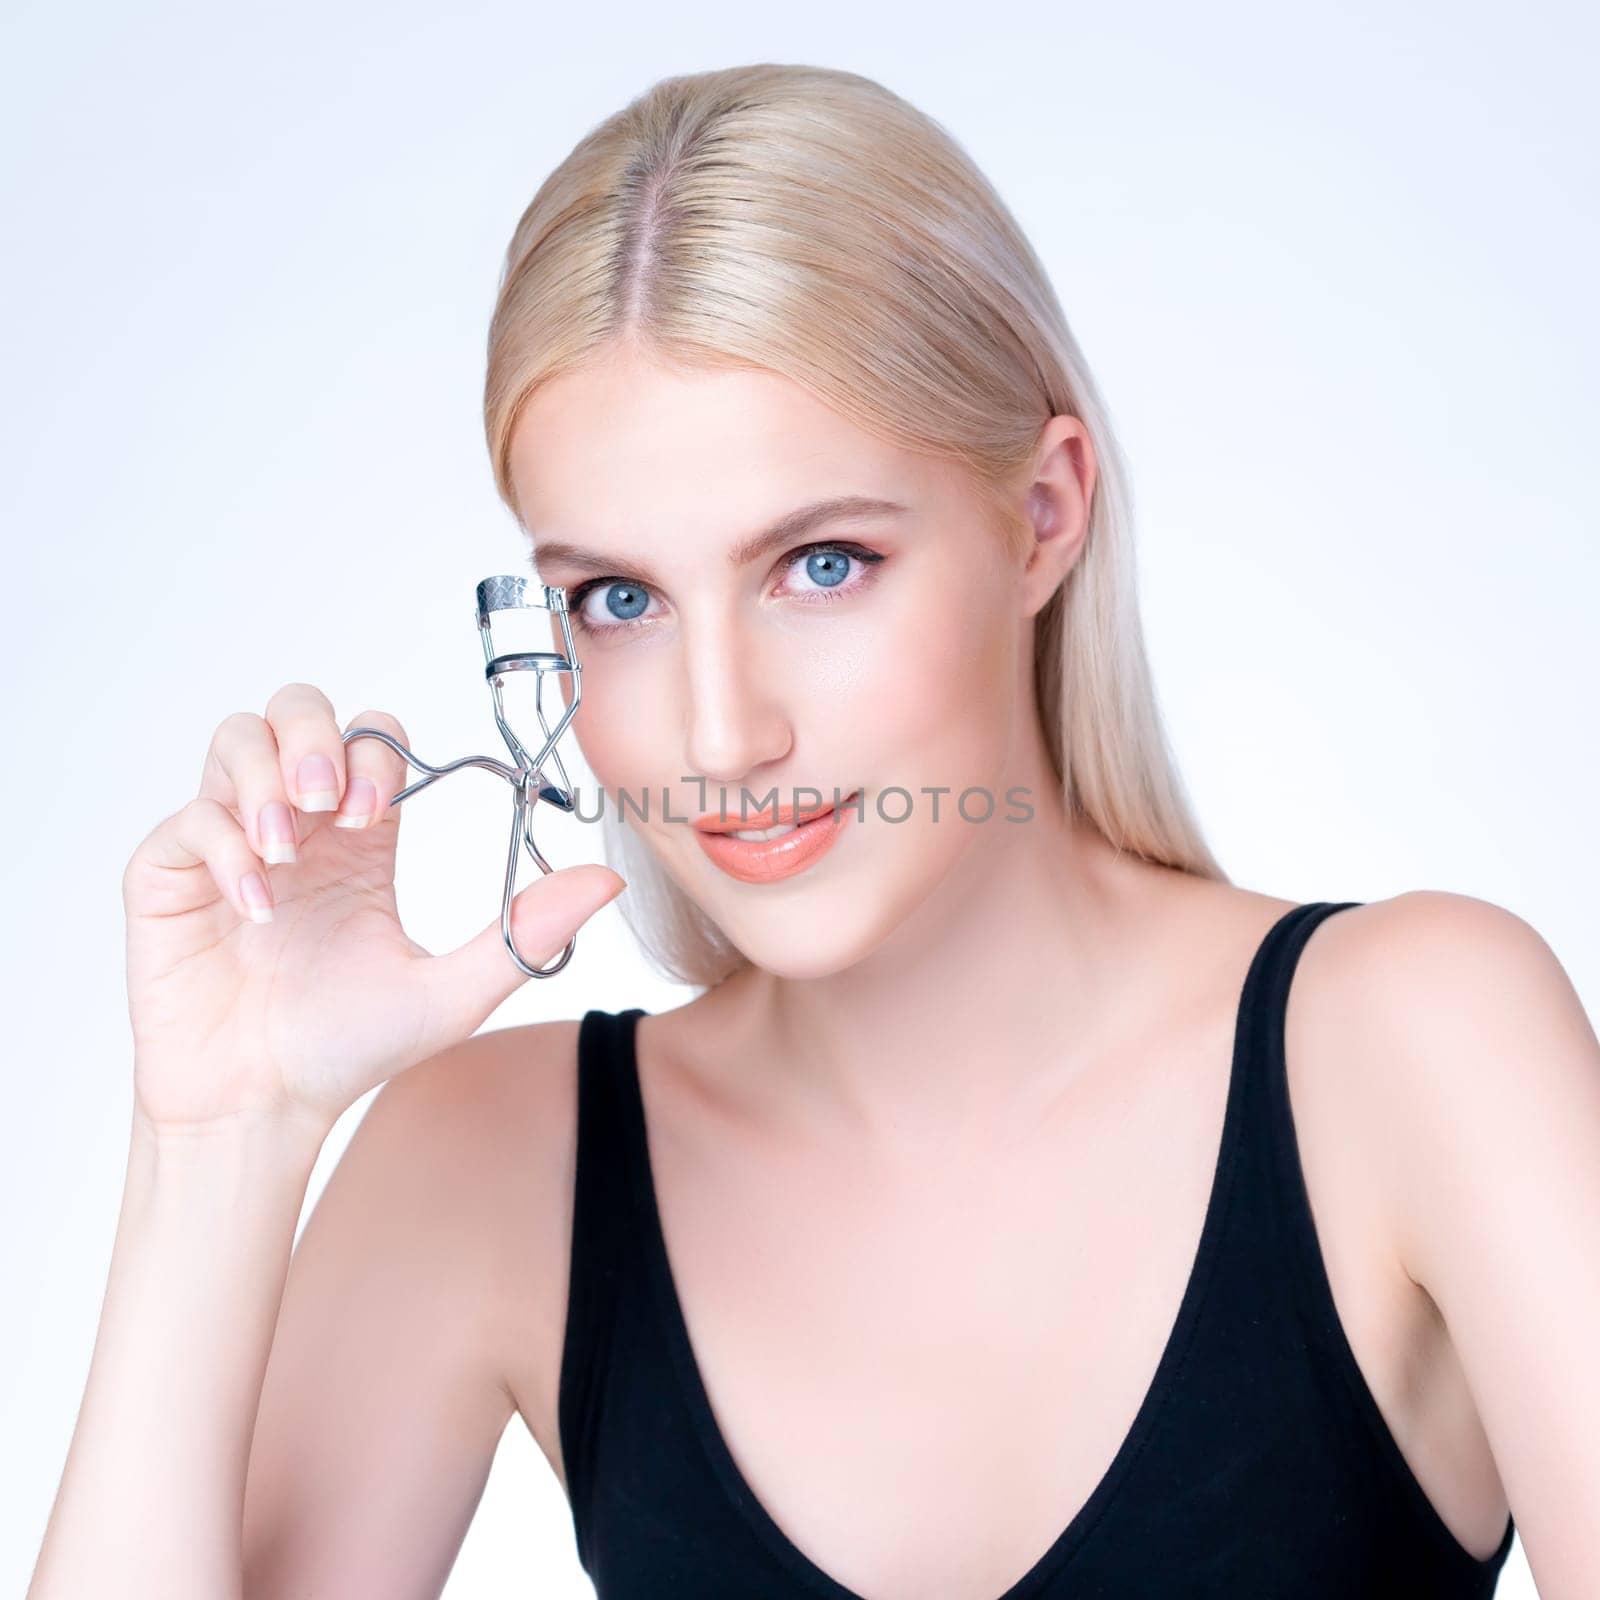 Personable woman correct eyelash curler with alluring facial makeup by biancoblue